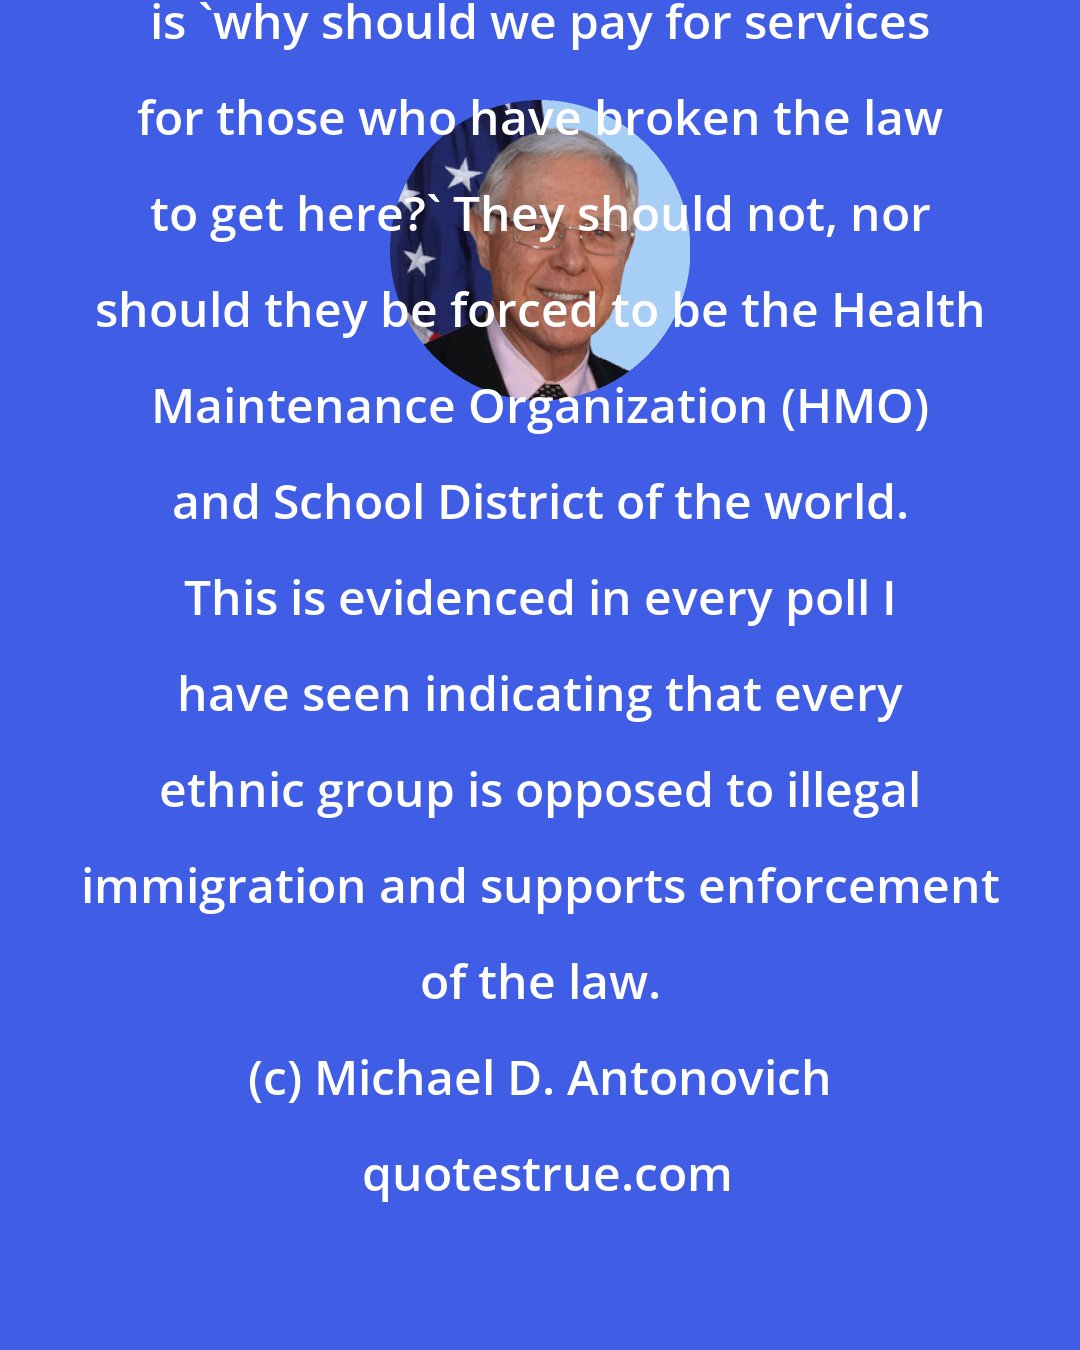 Michael D. Antonovich: The question taxpayers keep asking is 'why should we pay for services for those who have broken the law to get here?' They should not, nor should they be forced to be the Health Maintenance Organization (HMO) and School District of the world. This is evidenced in every poll I have seen indicating that every ethnic group is opposed to illegal immigration and supports enforcement of the law.